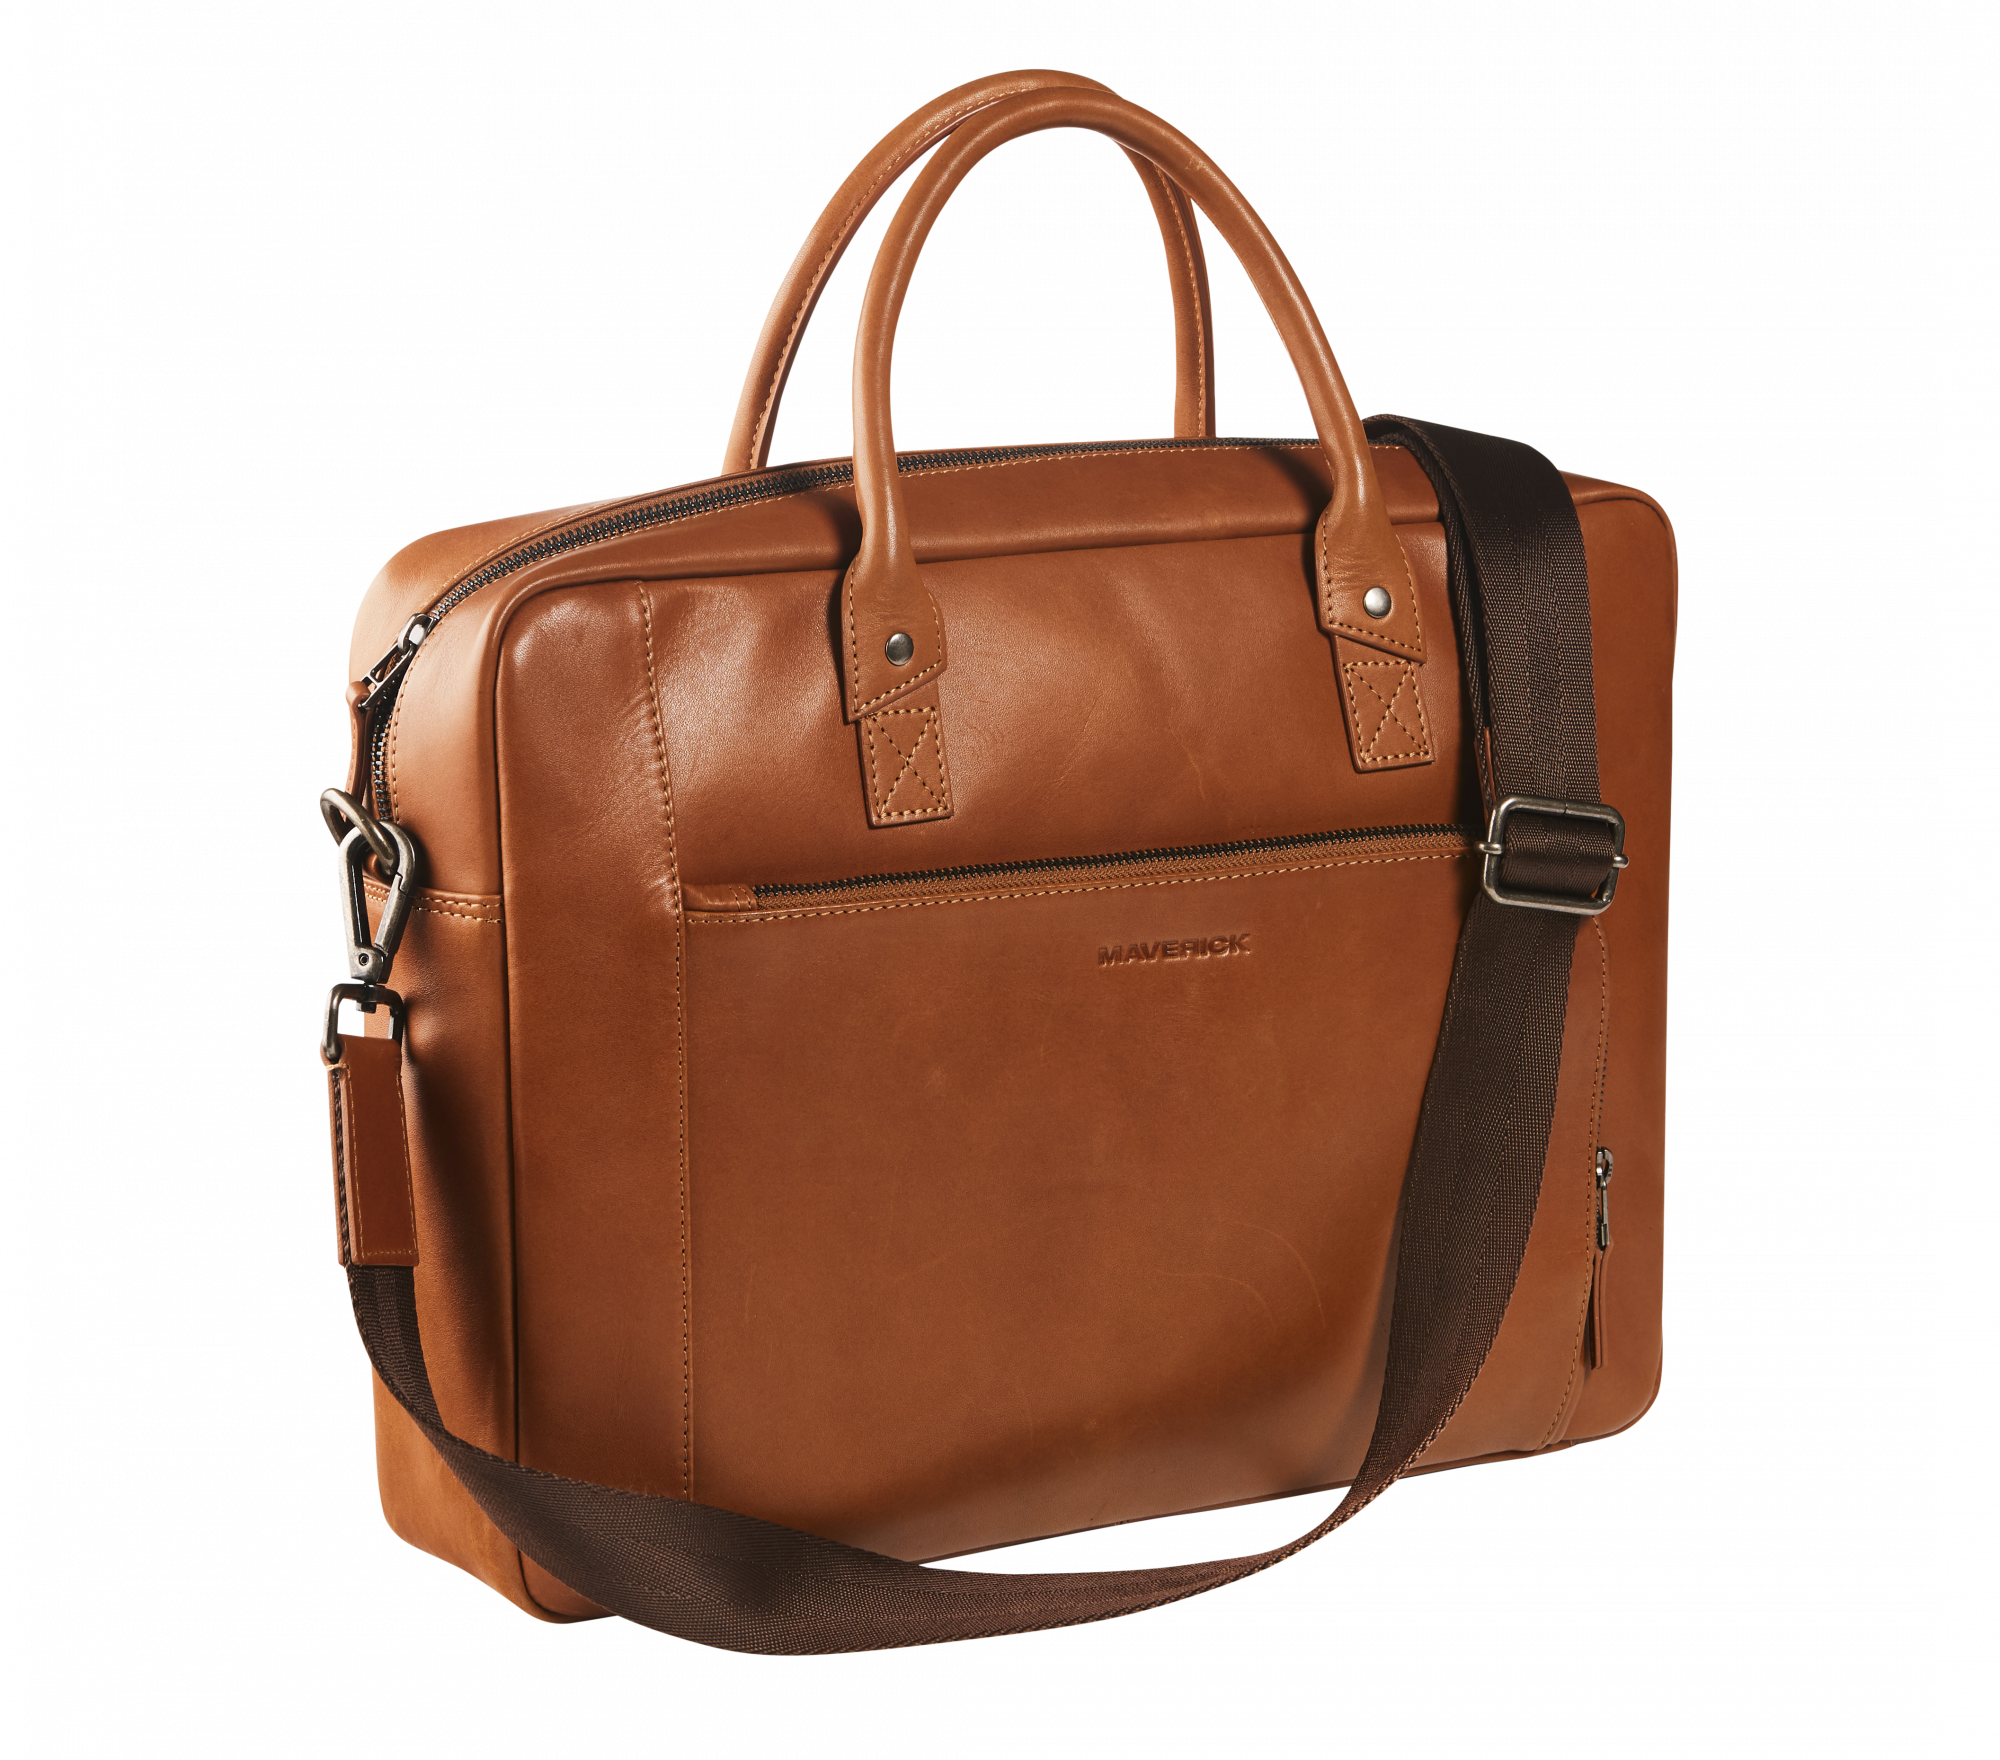 Leather business bag with laptop pocket 15'6